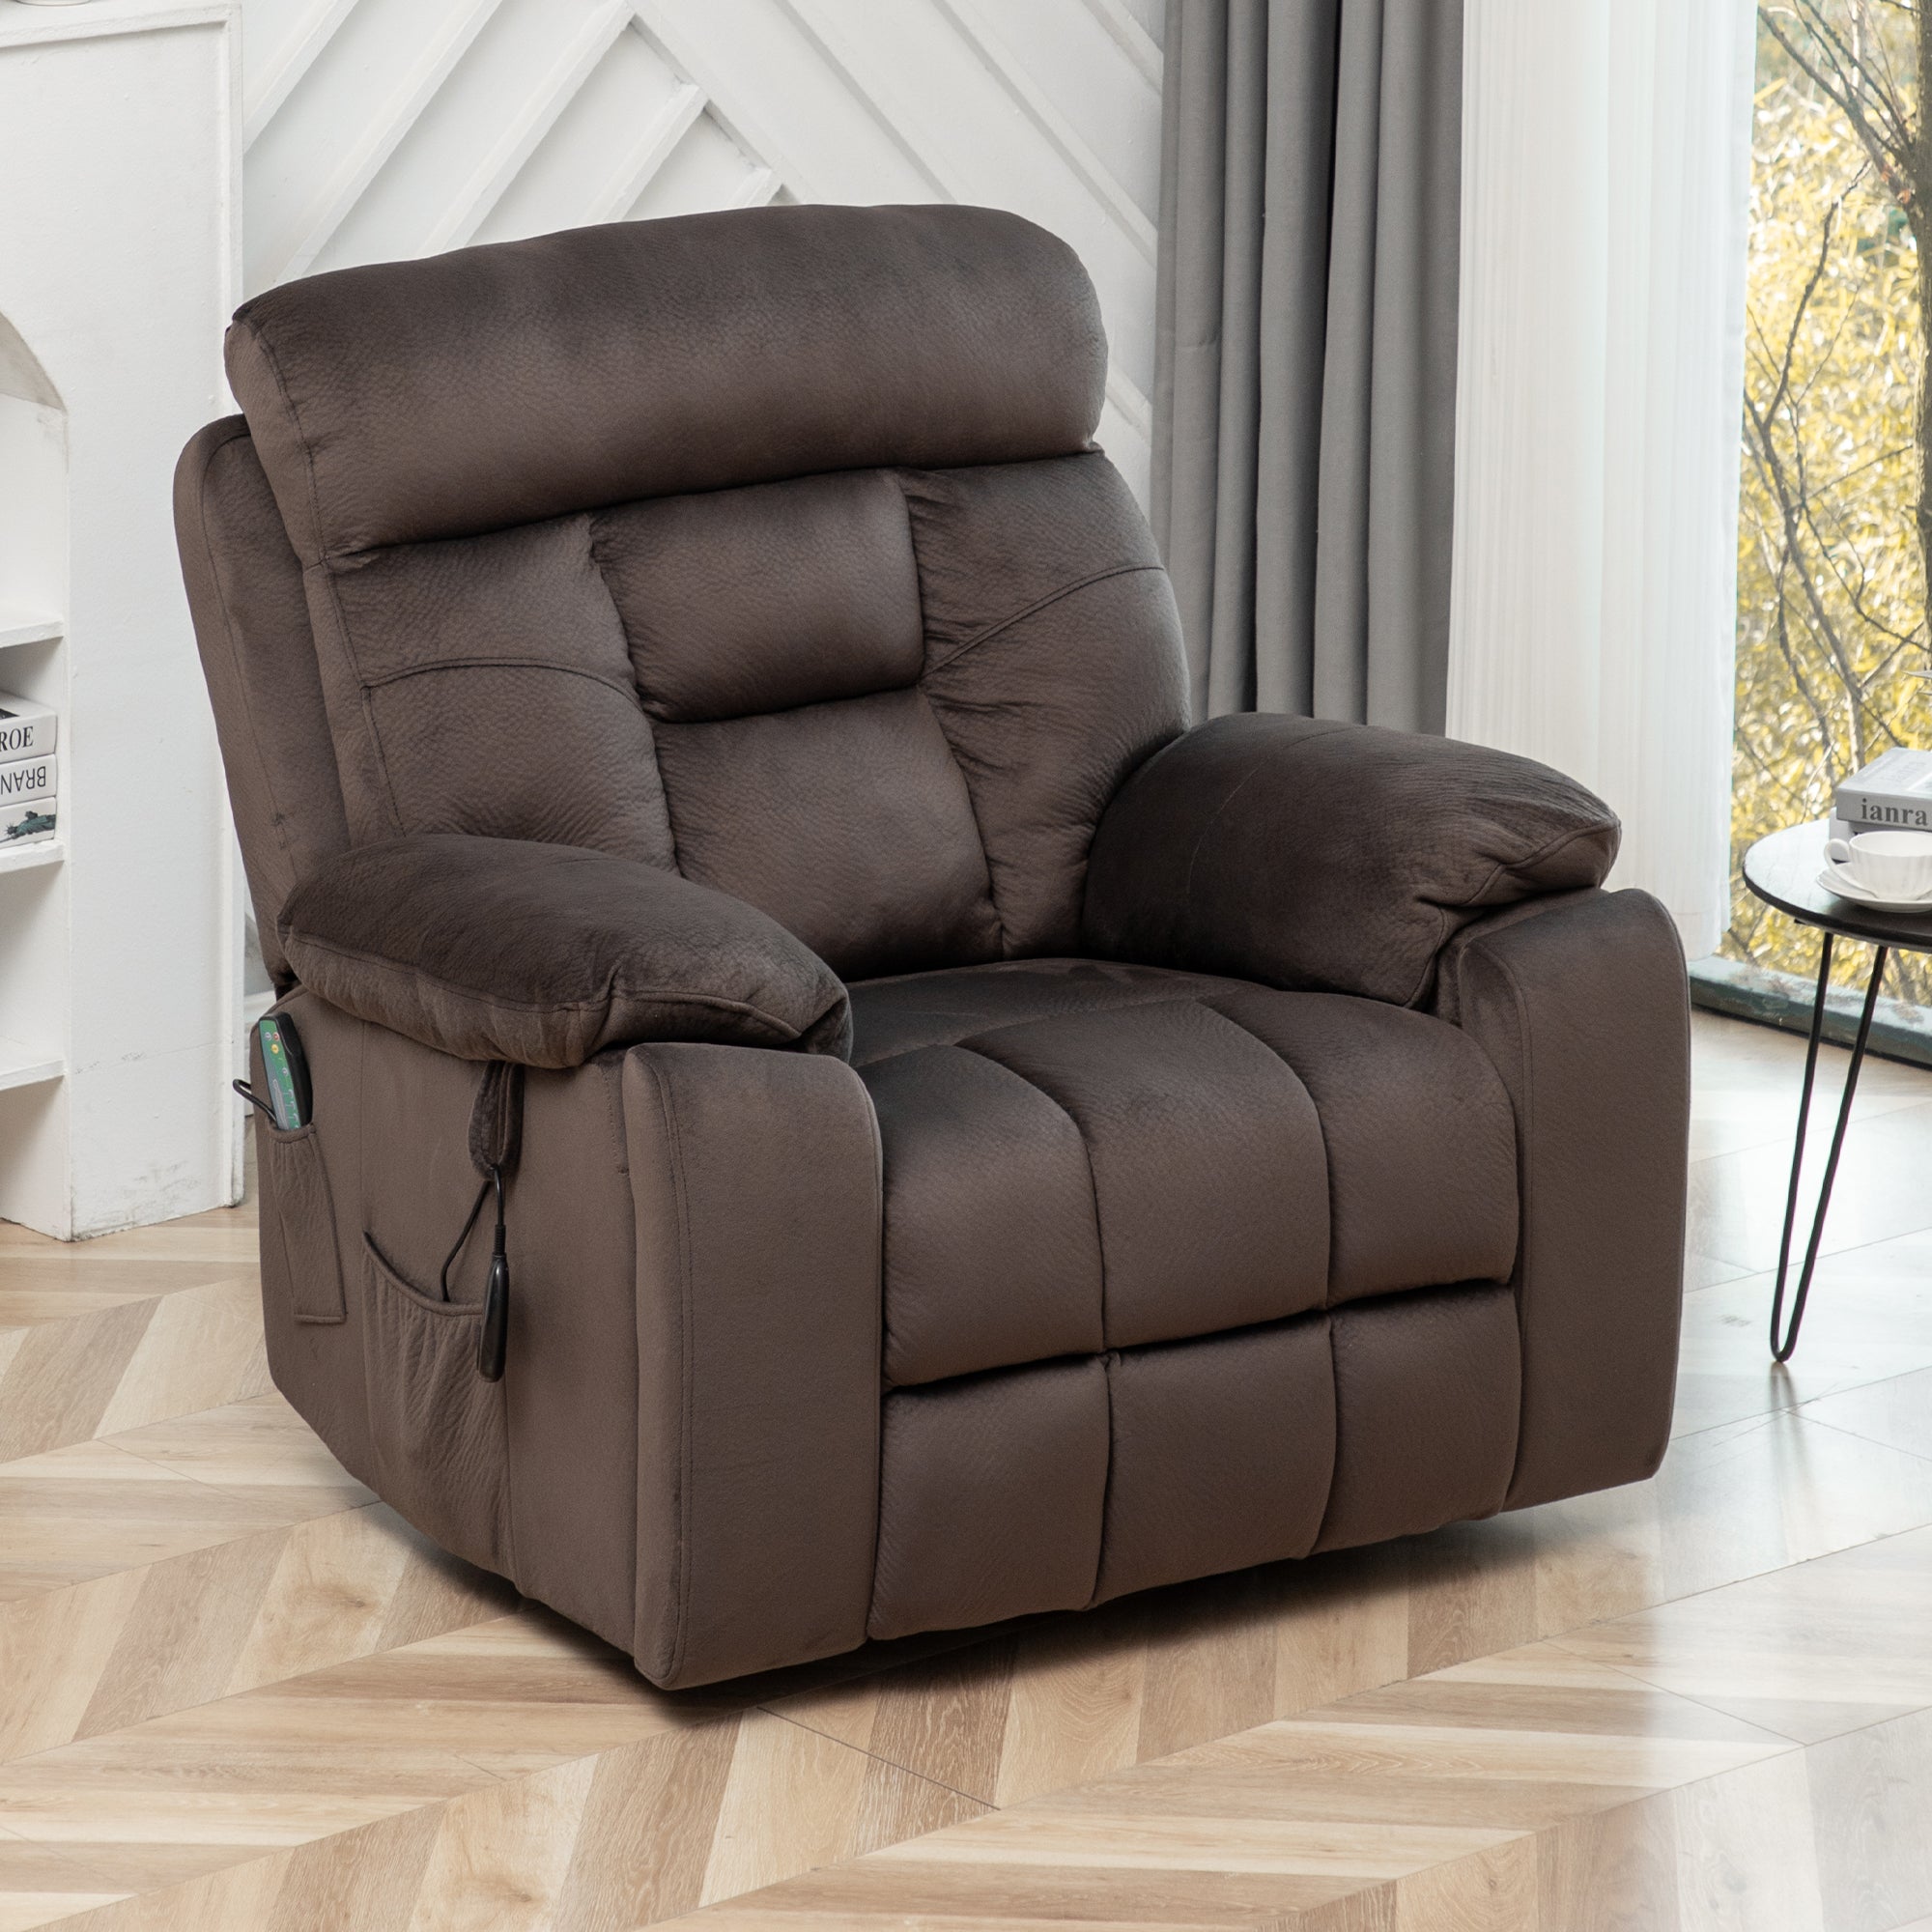 uhomepro Large Electric Massage Recliner with Heat, Fabric Lift